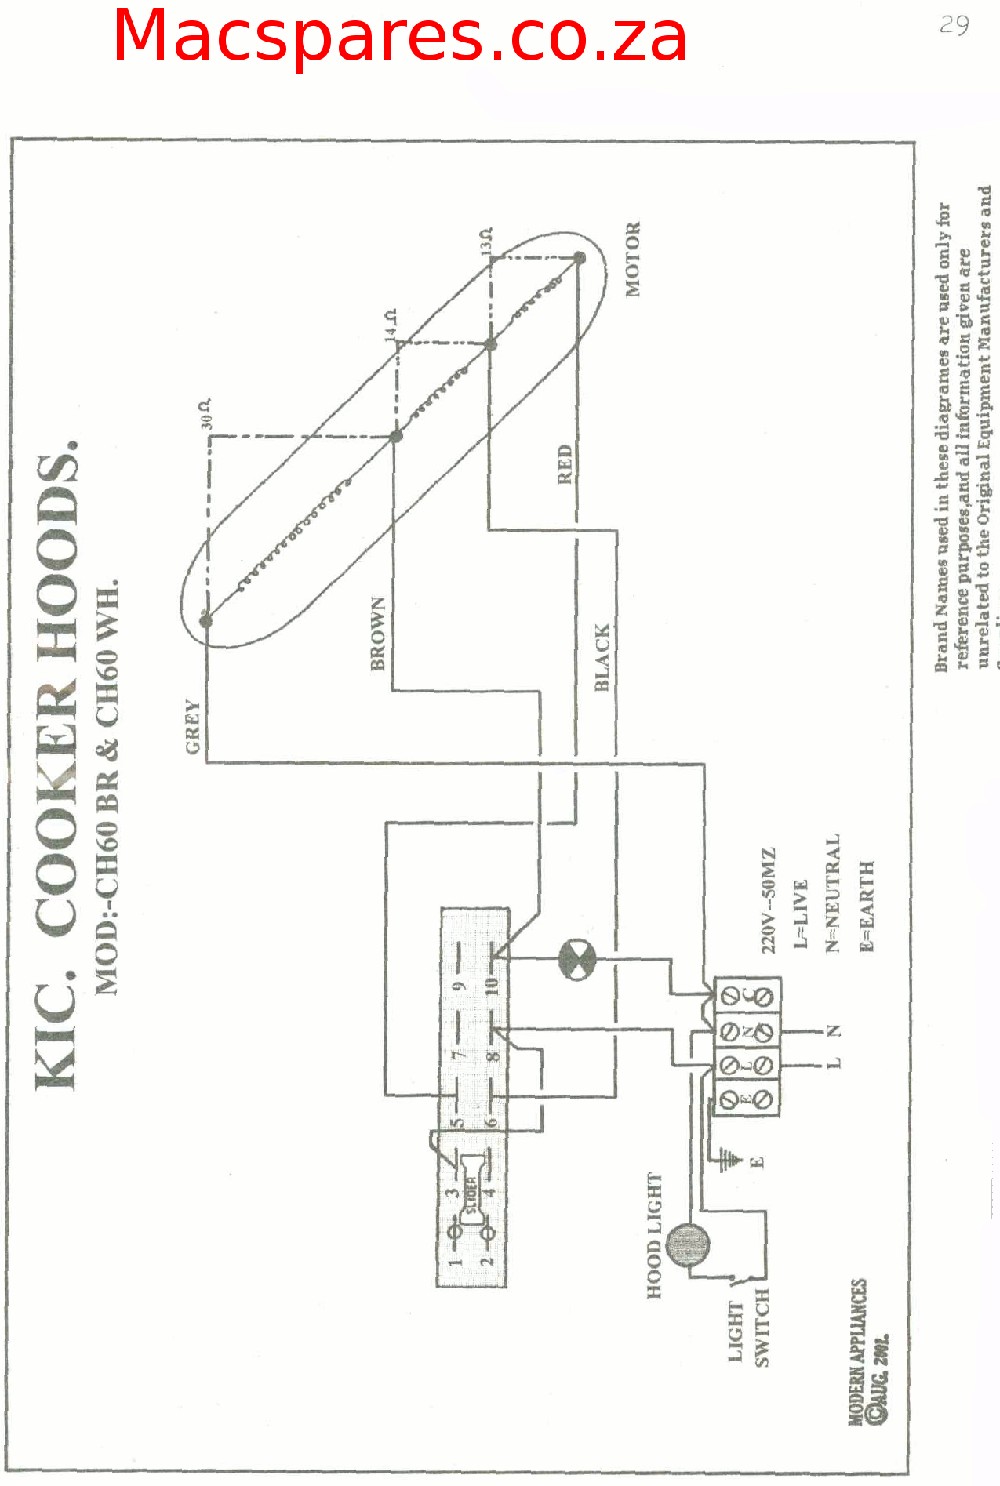 Wiring Diagram How To Wire An Electric Cooker KIC Magnificent